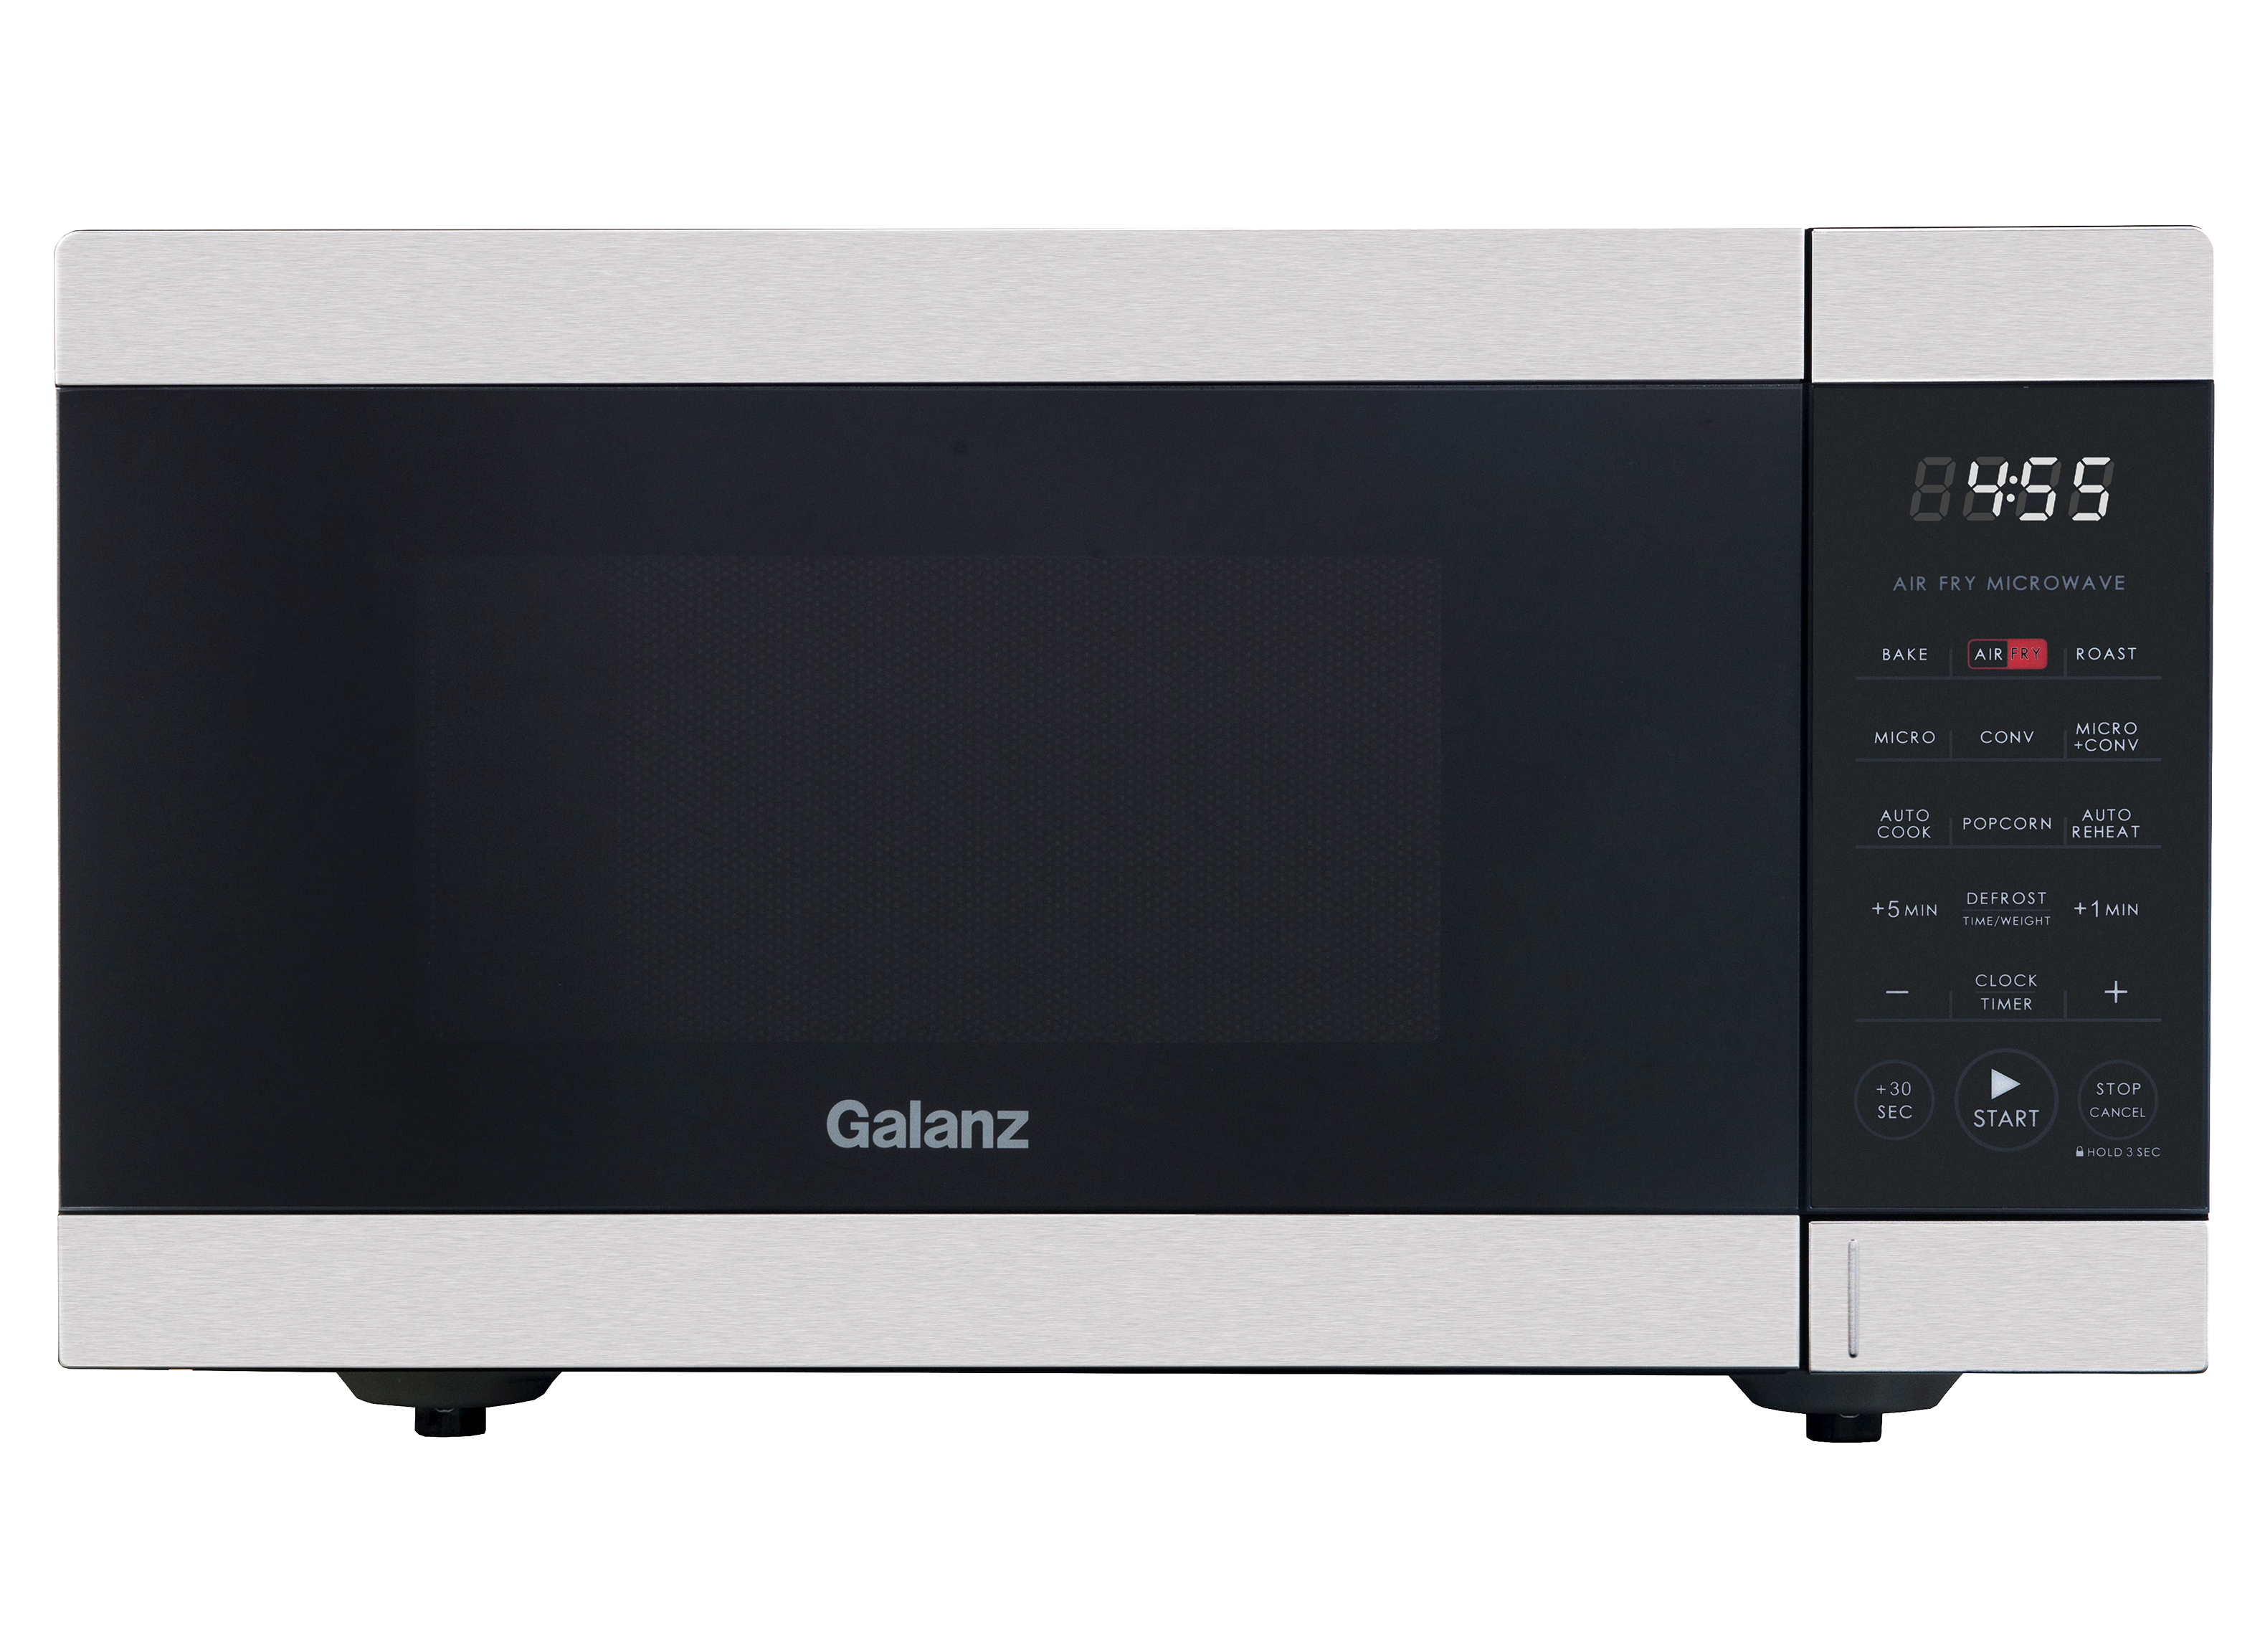 Opening Galanz Microwave & Air Fryer combo